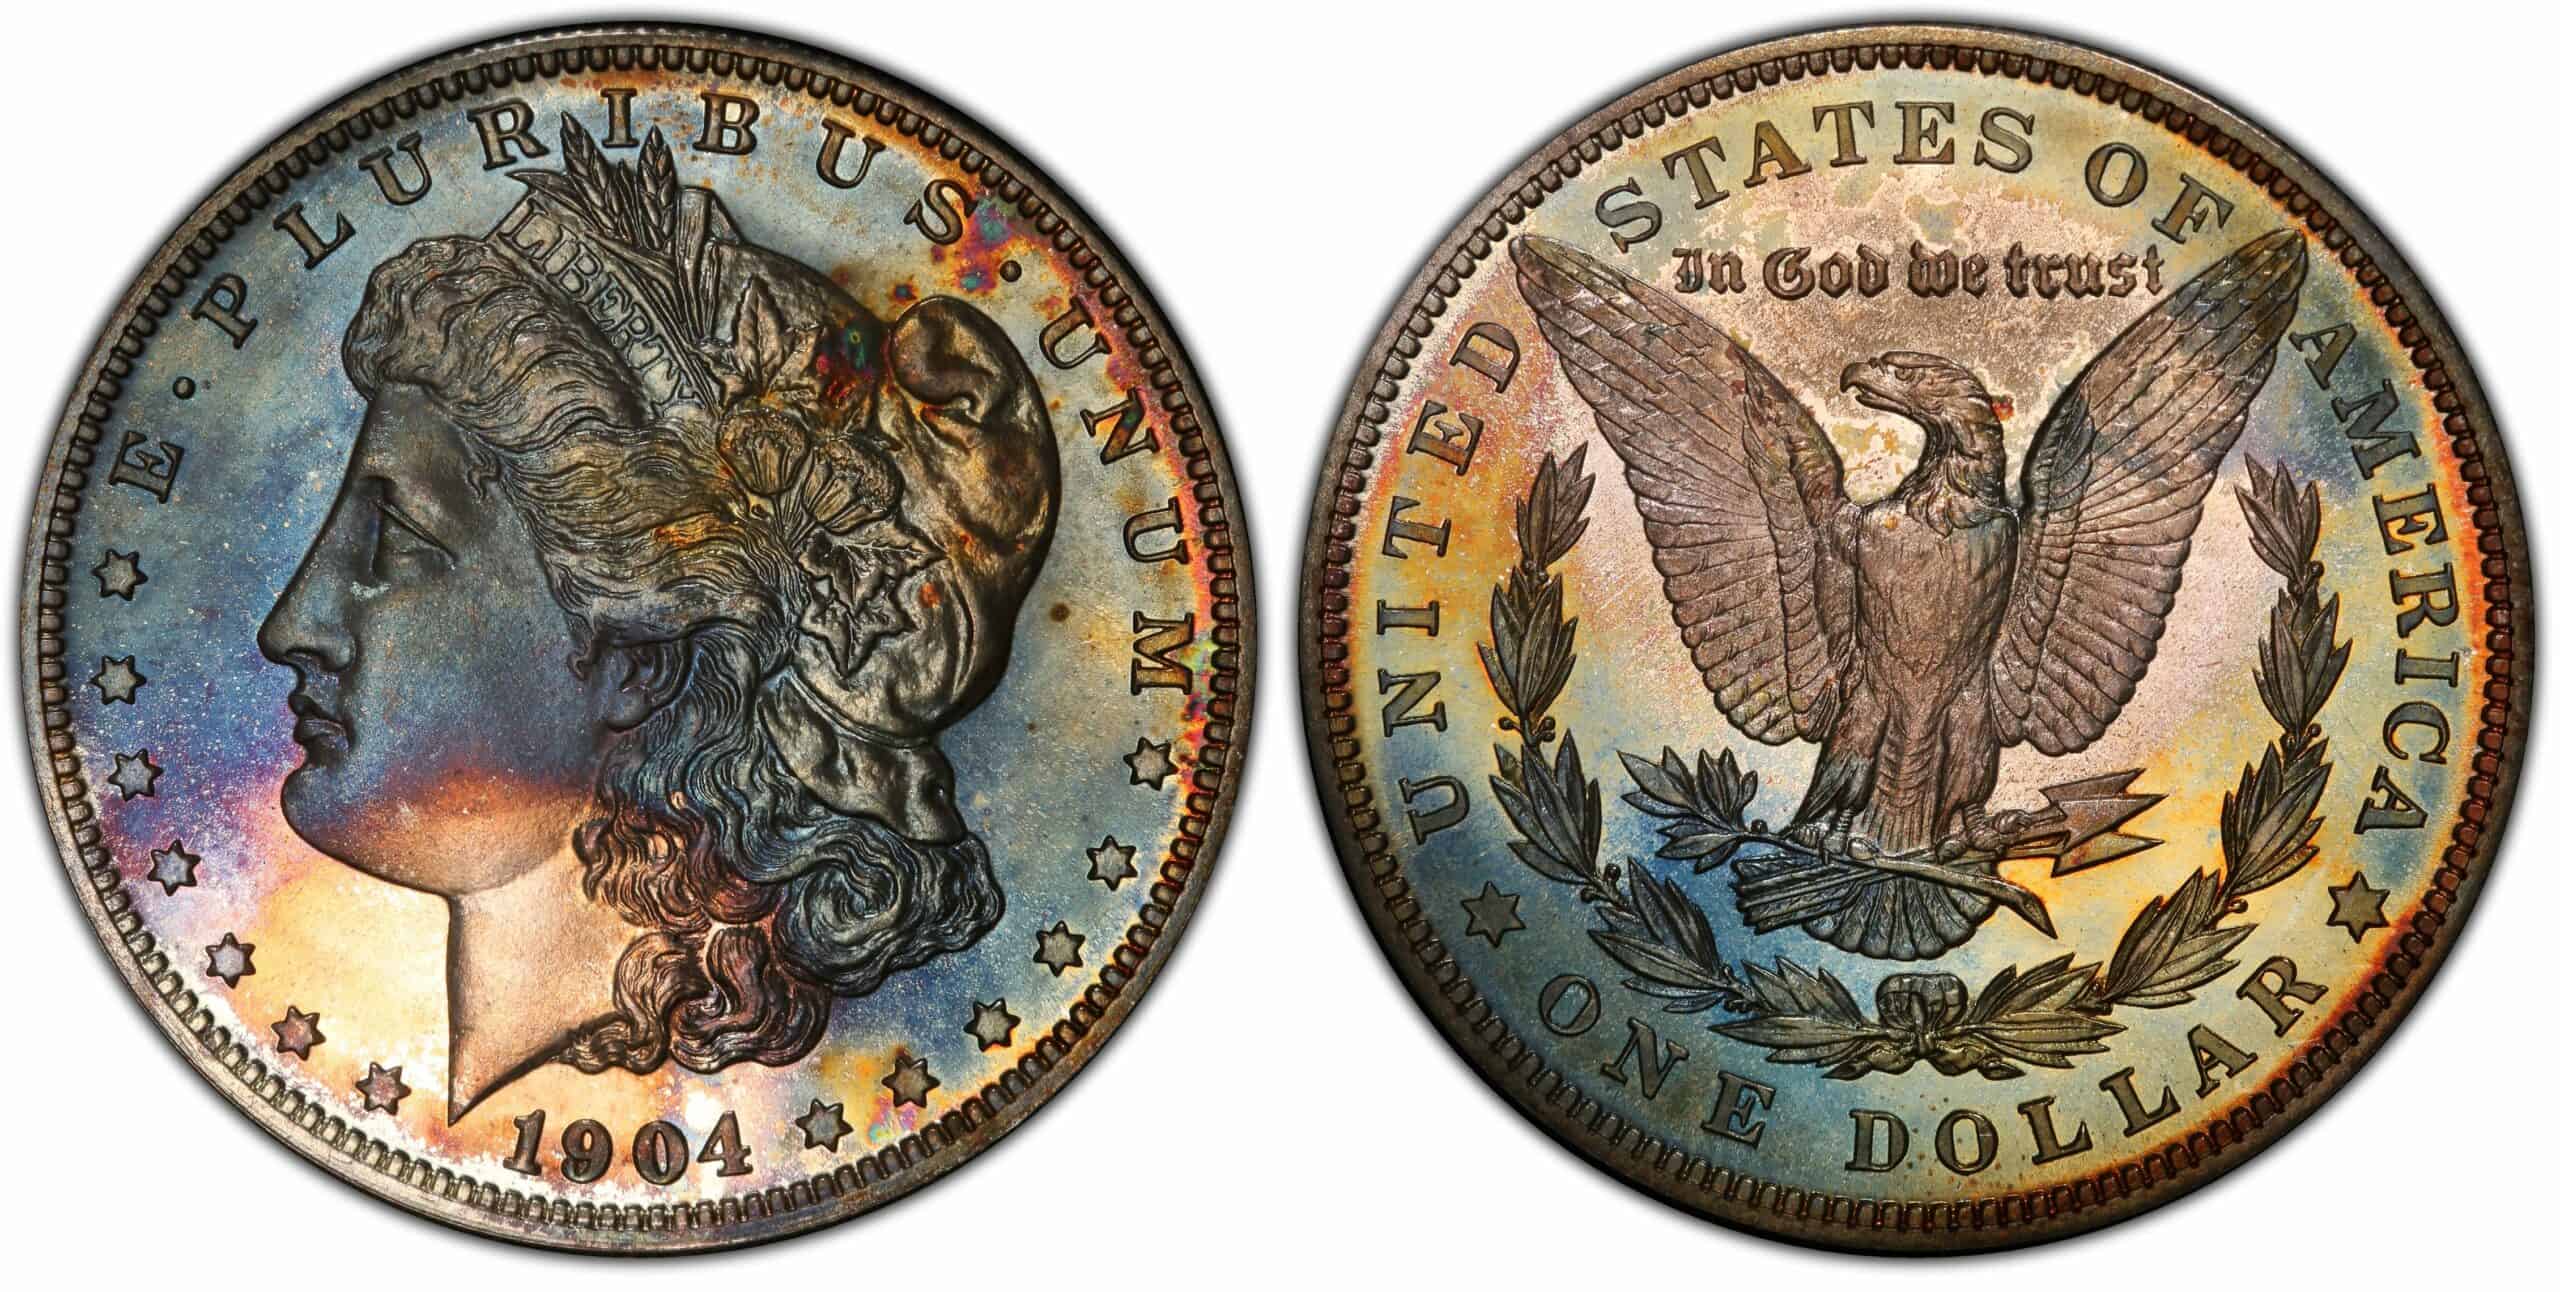 The 1904 Proof Silver Dollar Value